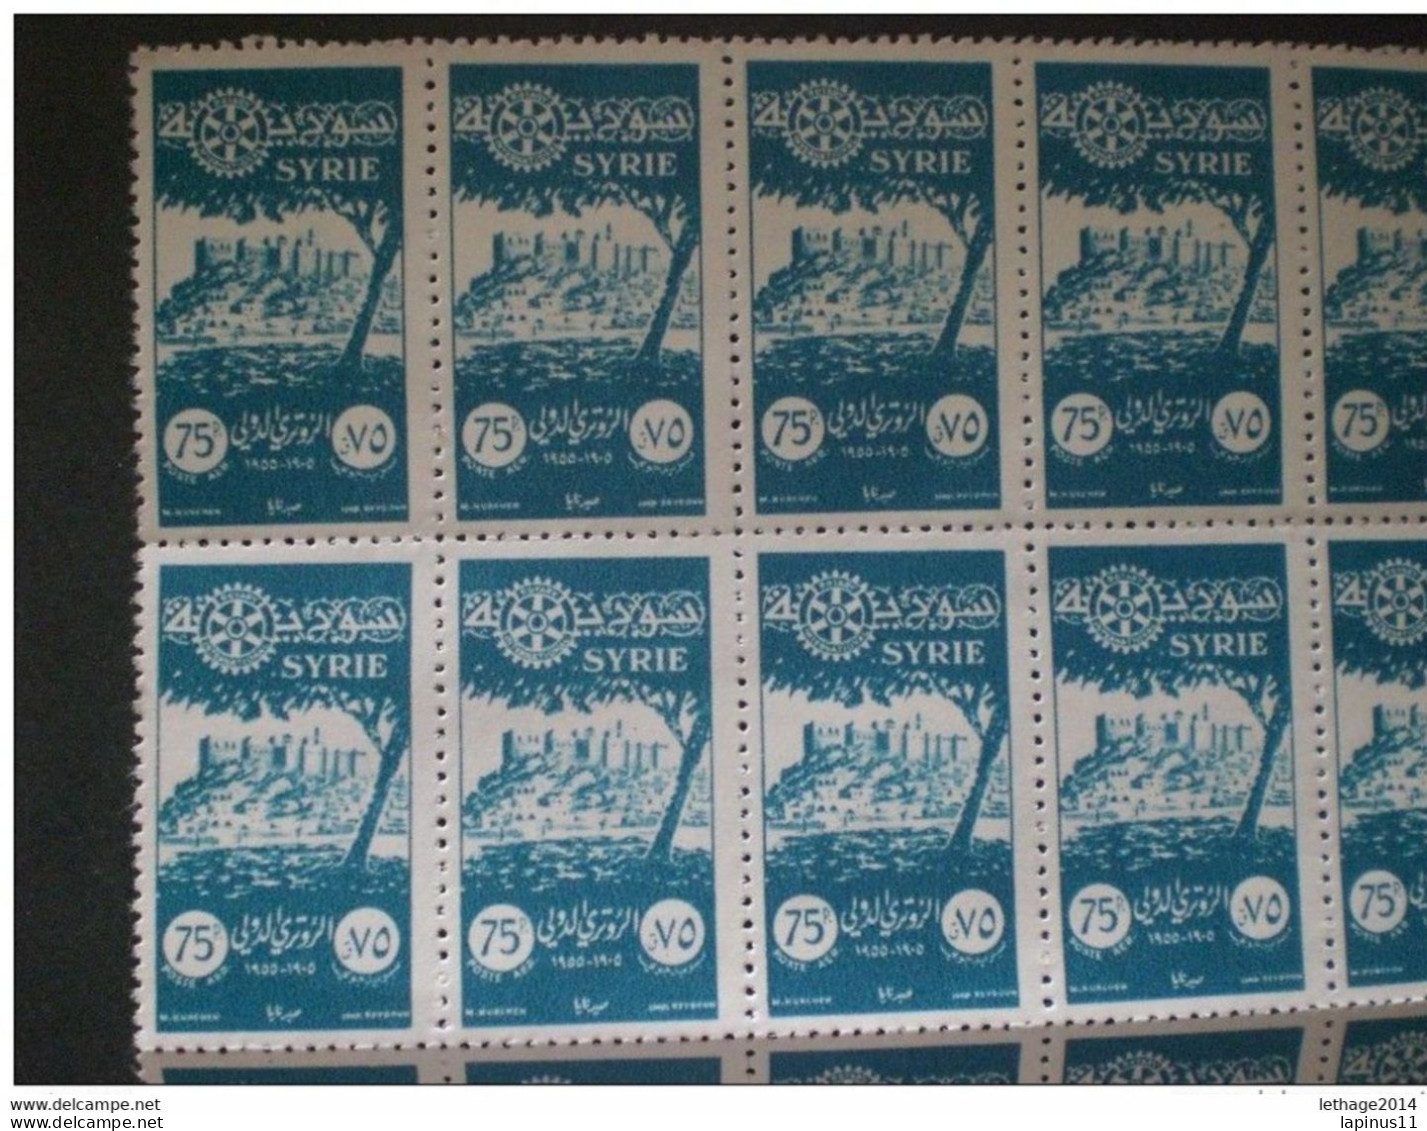 SYRIE سوريا SYRIA 1955 Airmail The 50th Anniversary Of Rotary International MNH Varietè Perforation Blind Drilling - Syria